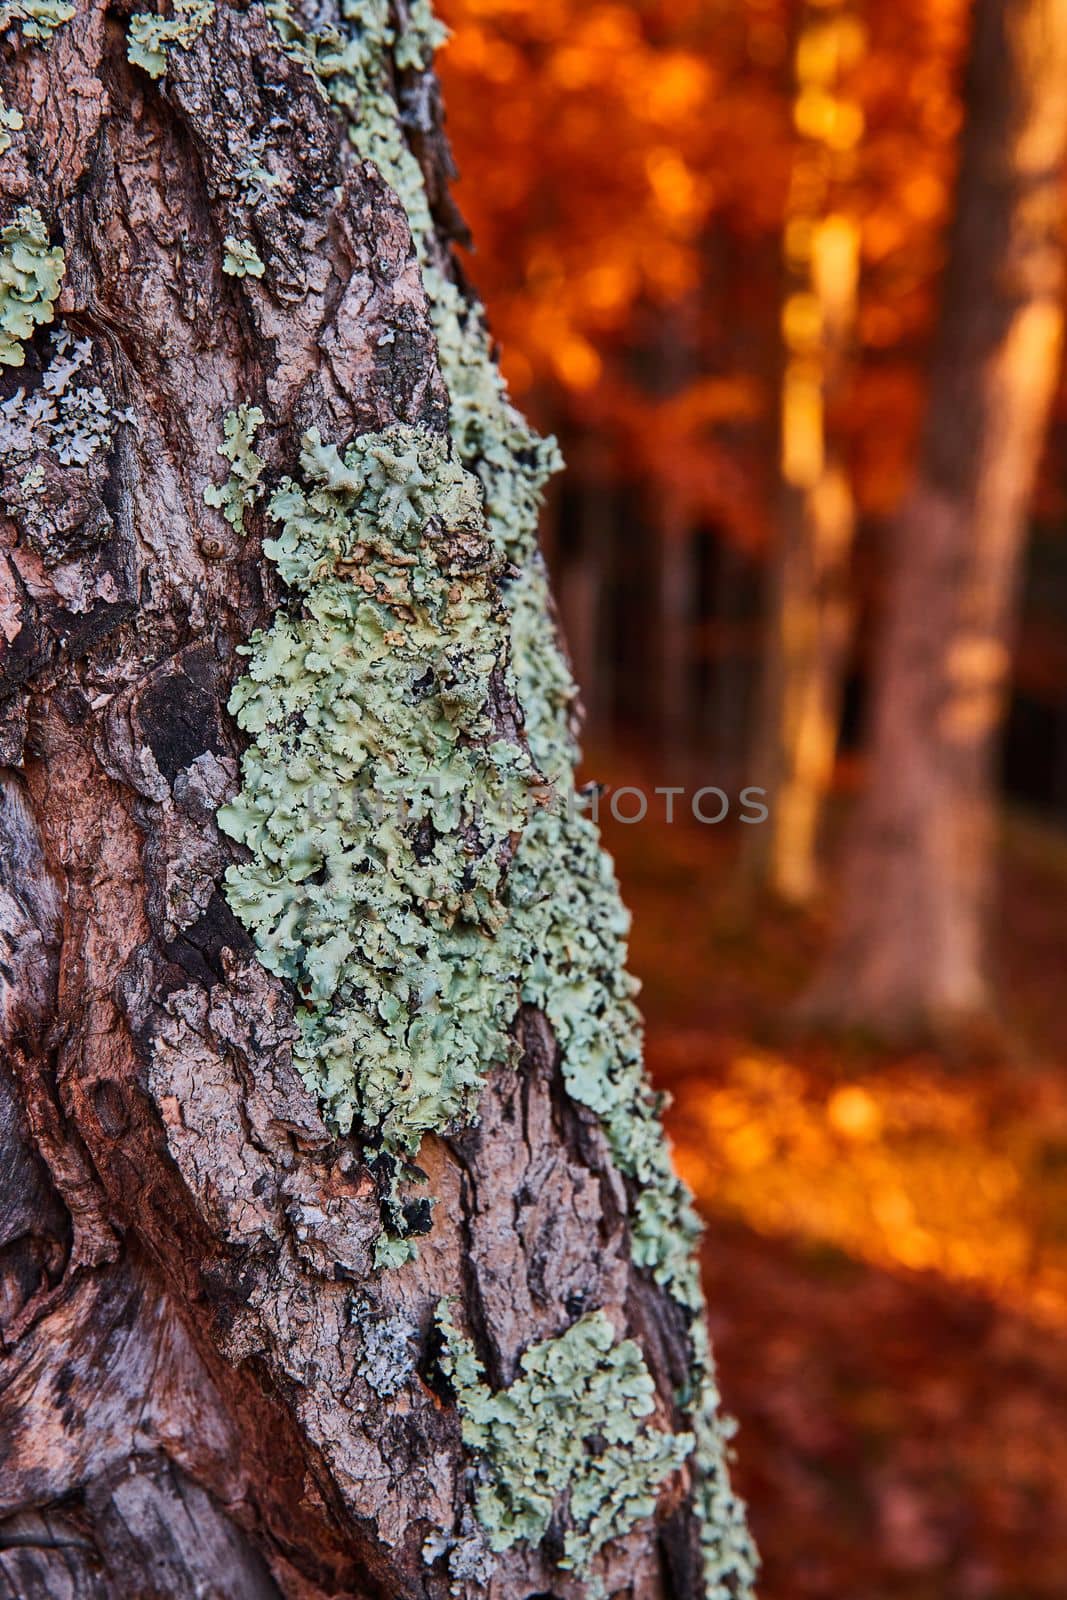 Image of Detail up close on tree bark with lichen patches and orange leaves on trees in background